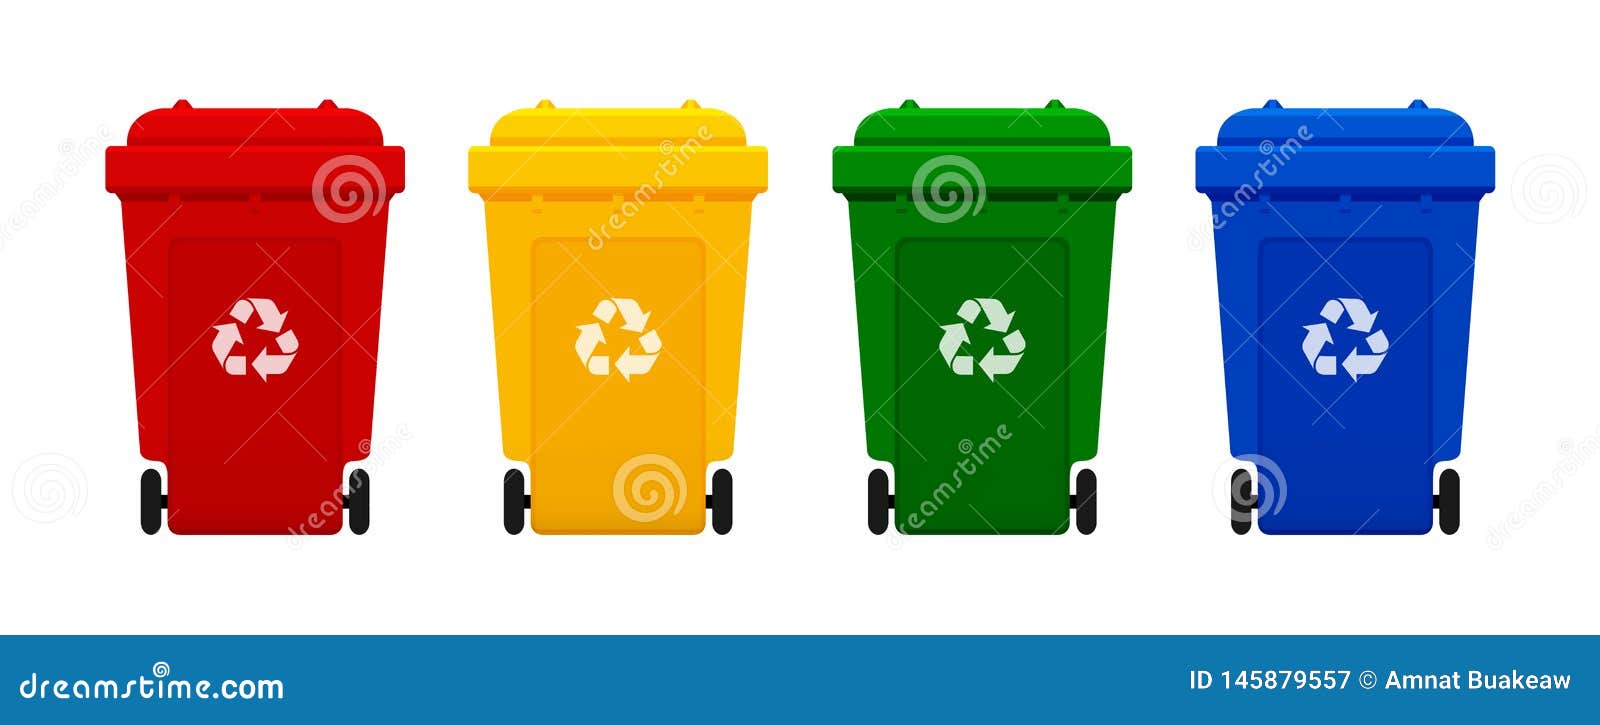 bin plastic, four colorful recycle bins  on white background, red, yellow, green and blue bins with recycle waste 